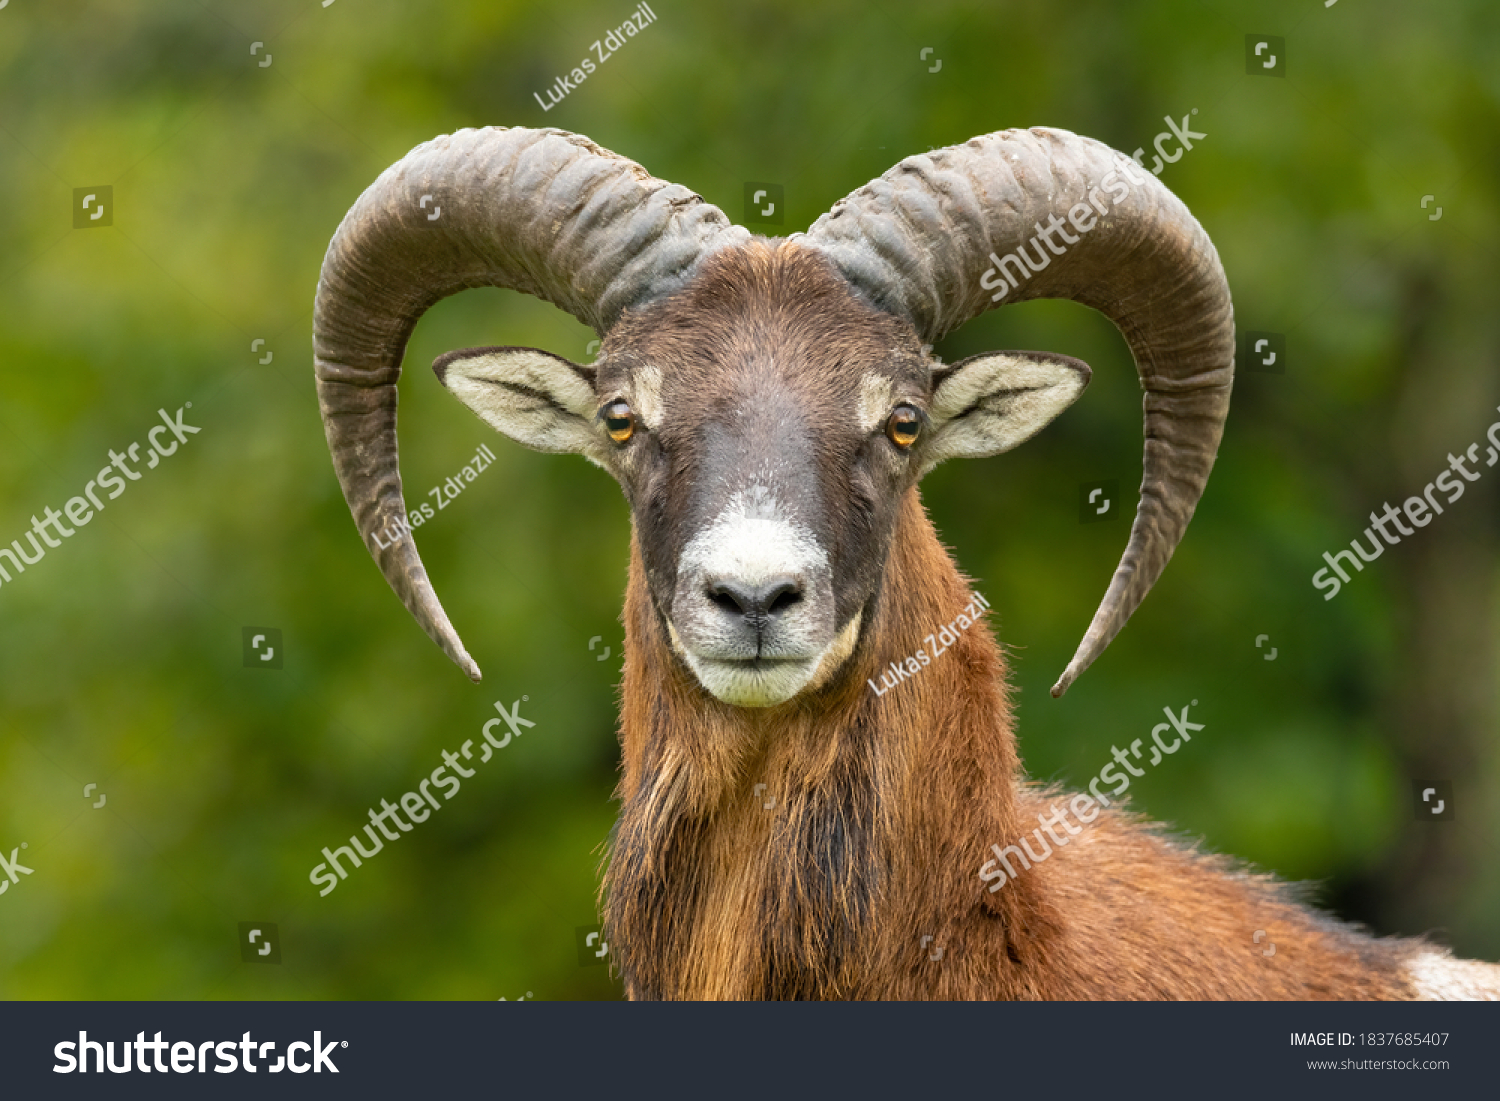 European mouflon (Ovis aries musimon) standing in the grass in the forest. Beautiful brown furry mouflon with horns in its environment with soft background. Wildlife scene from nature. Czech Republic #1837685407